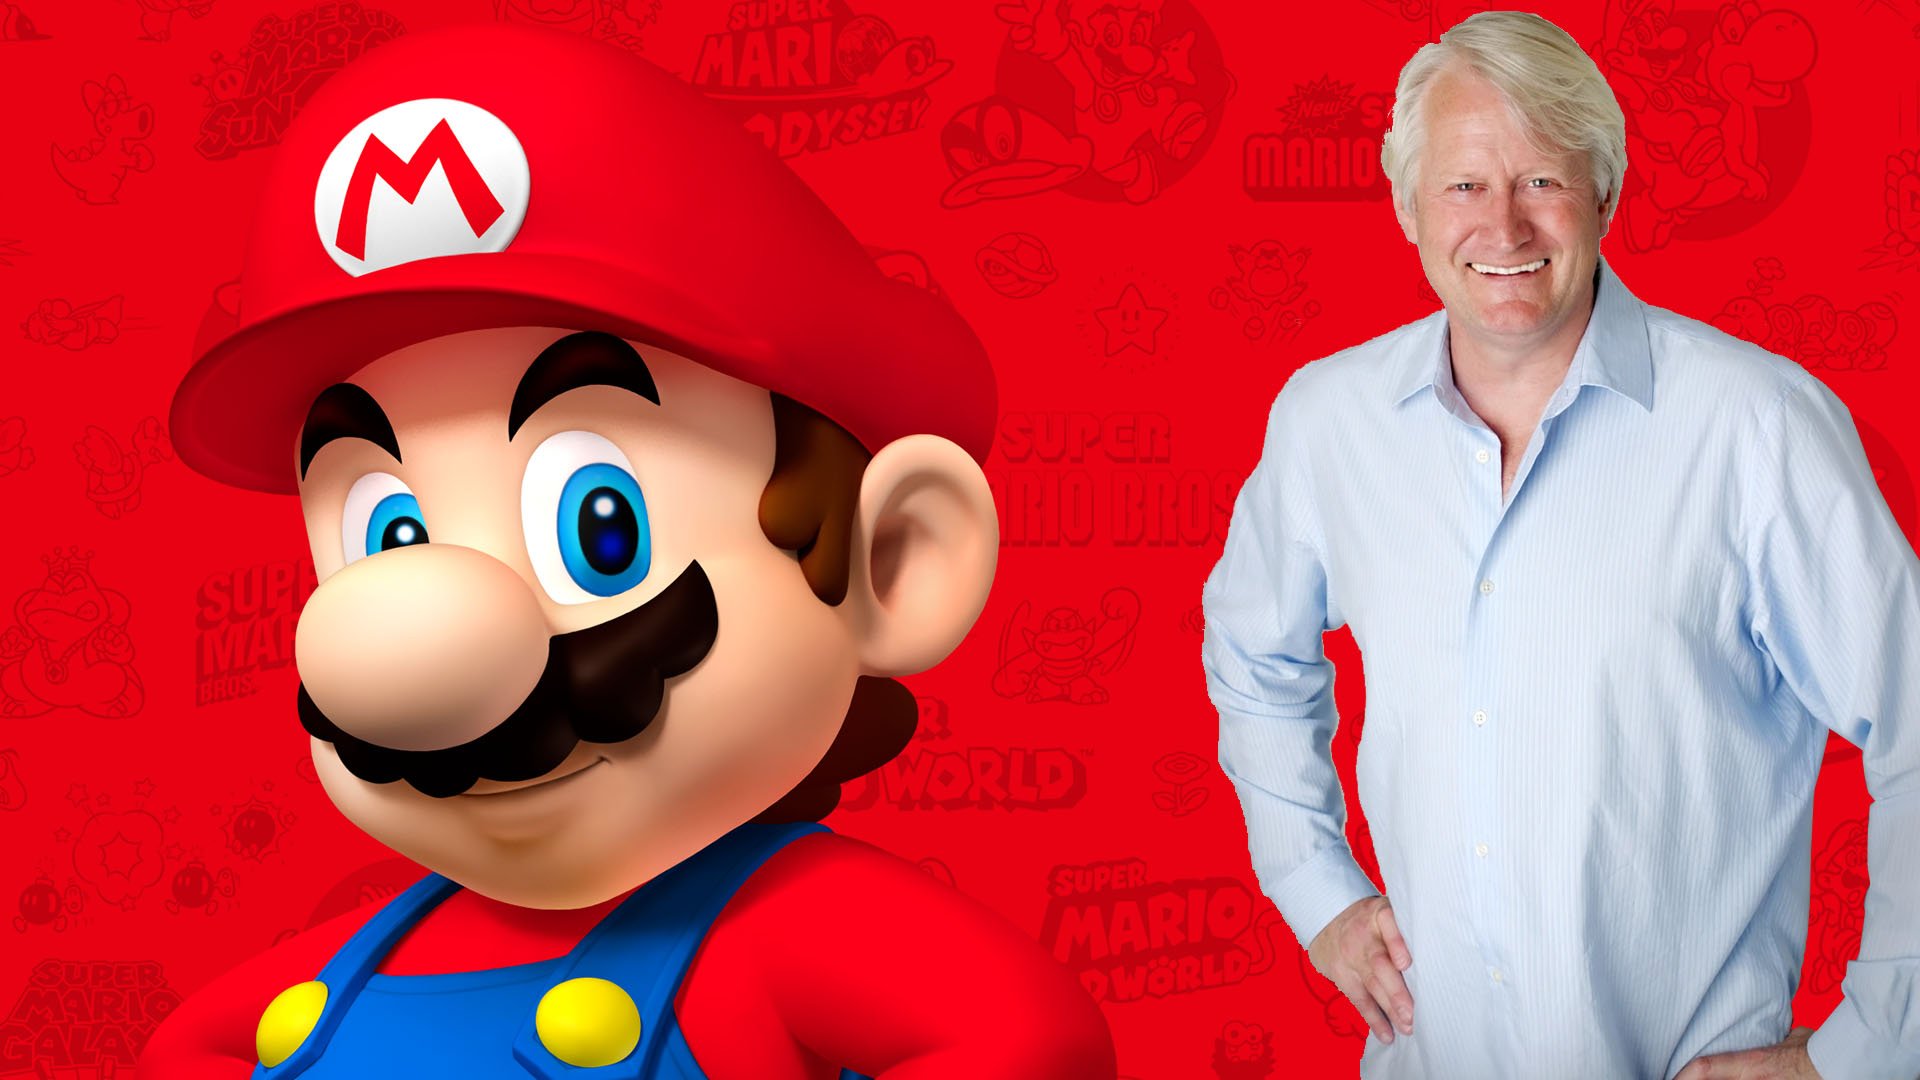 Charles Martinet is stepping down as the voice actor for Mario.